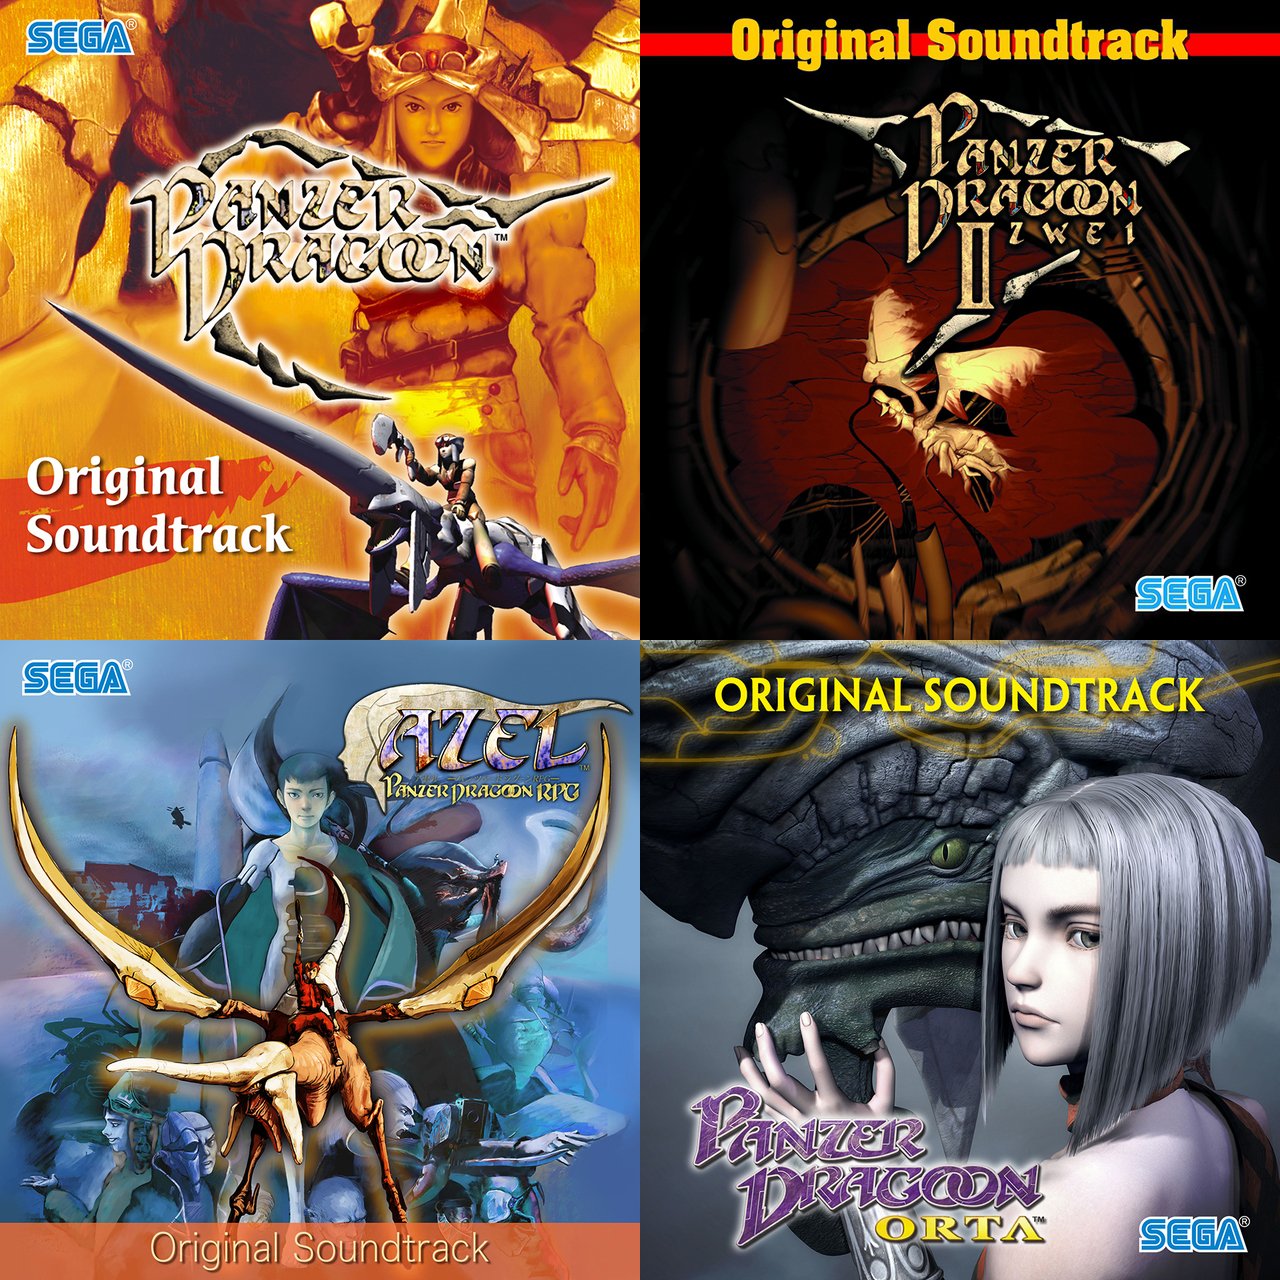 The Panzer Dragoon Original Soundtracks Are Now Available On Streaming Services